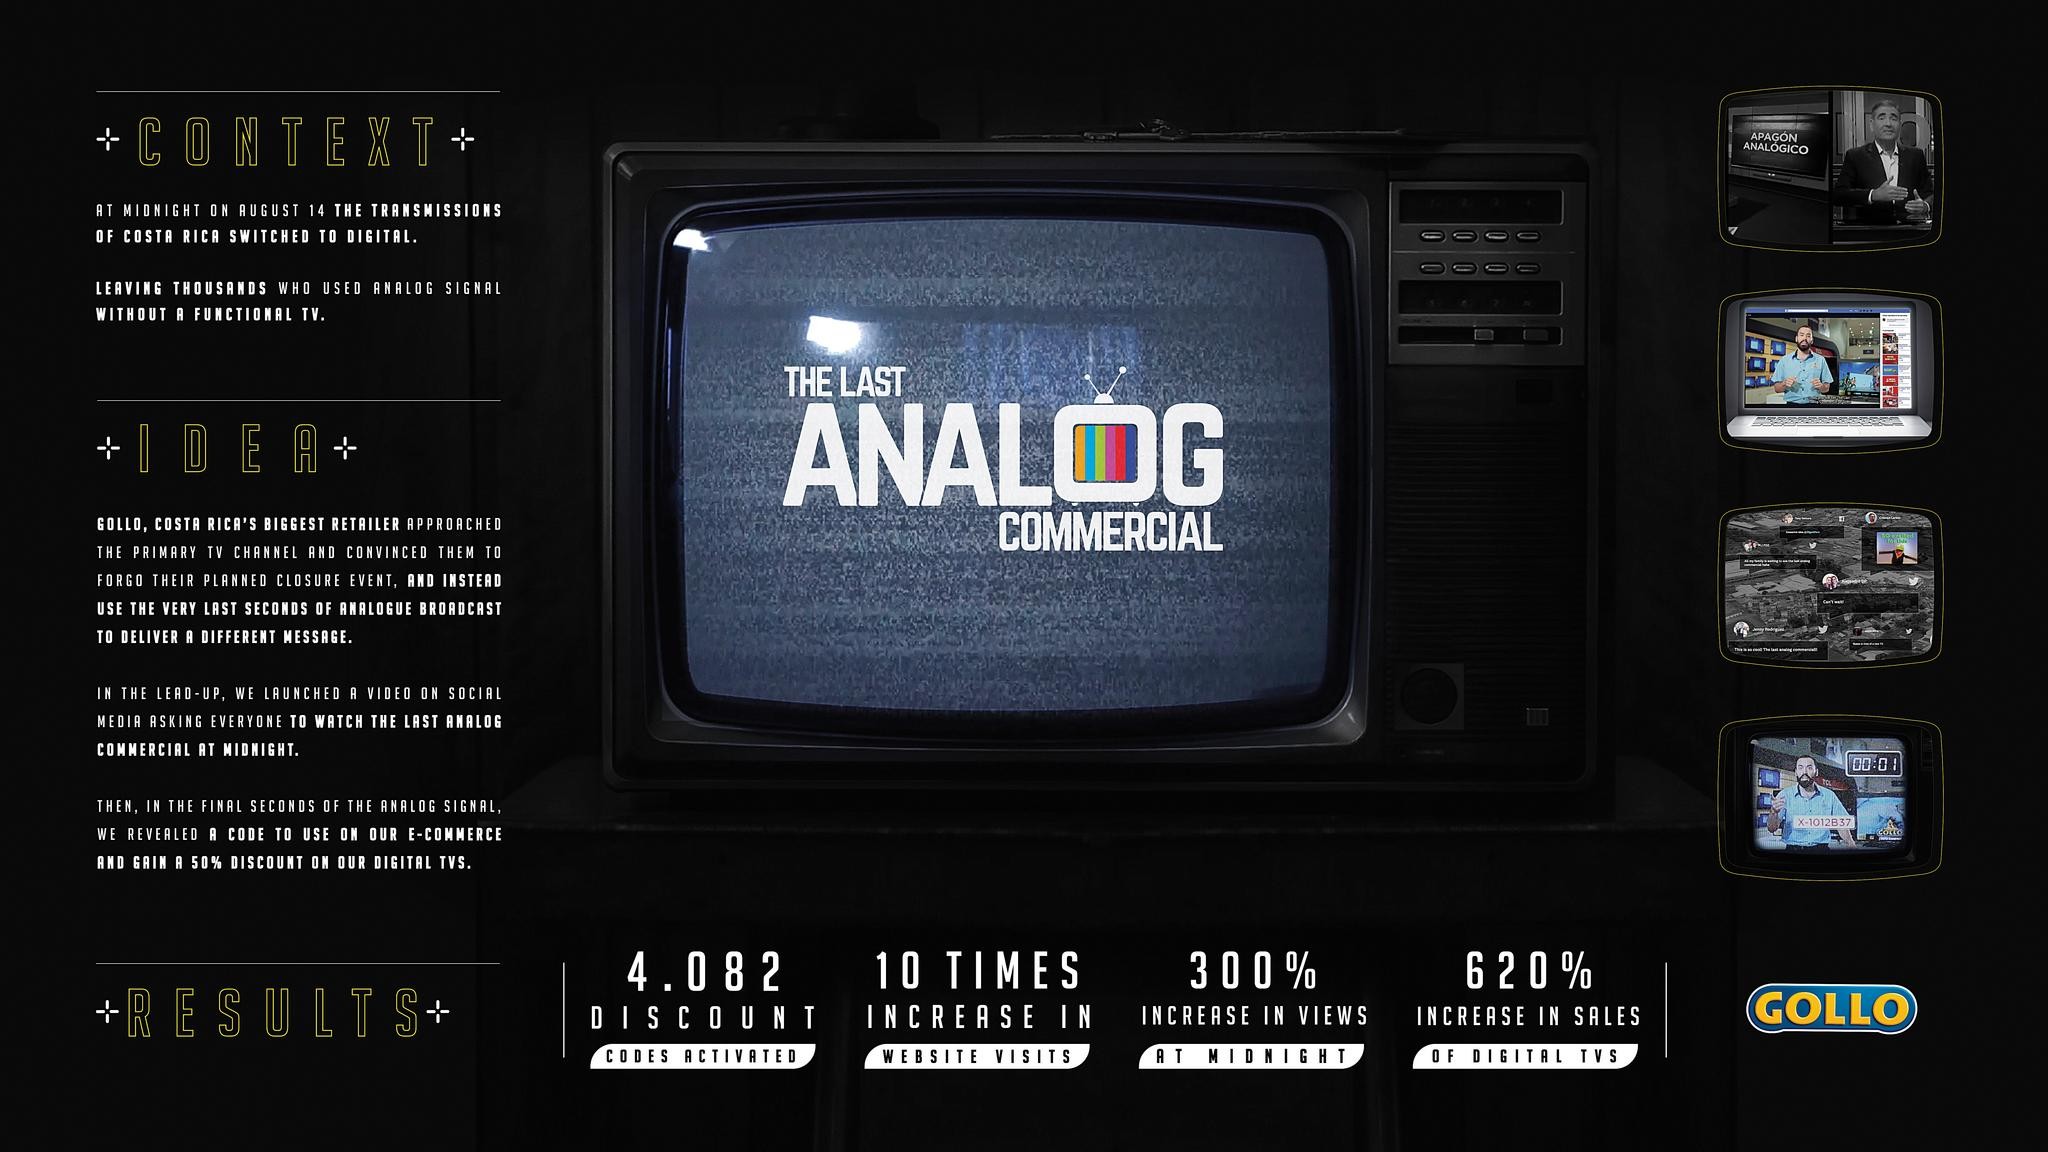 The Last Analog Commercial